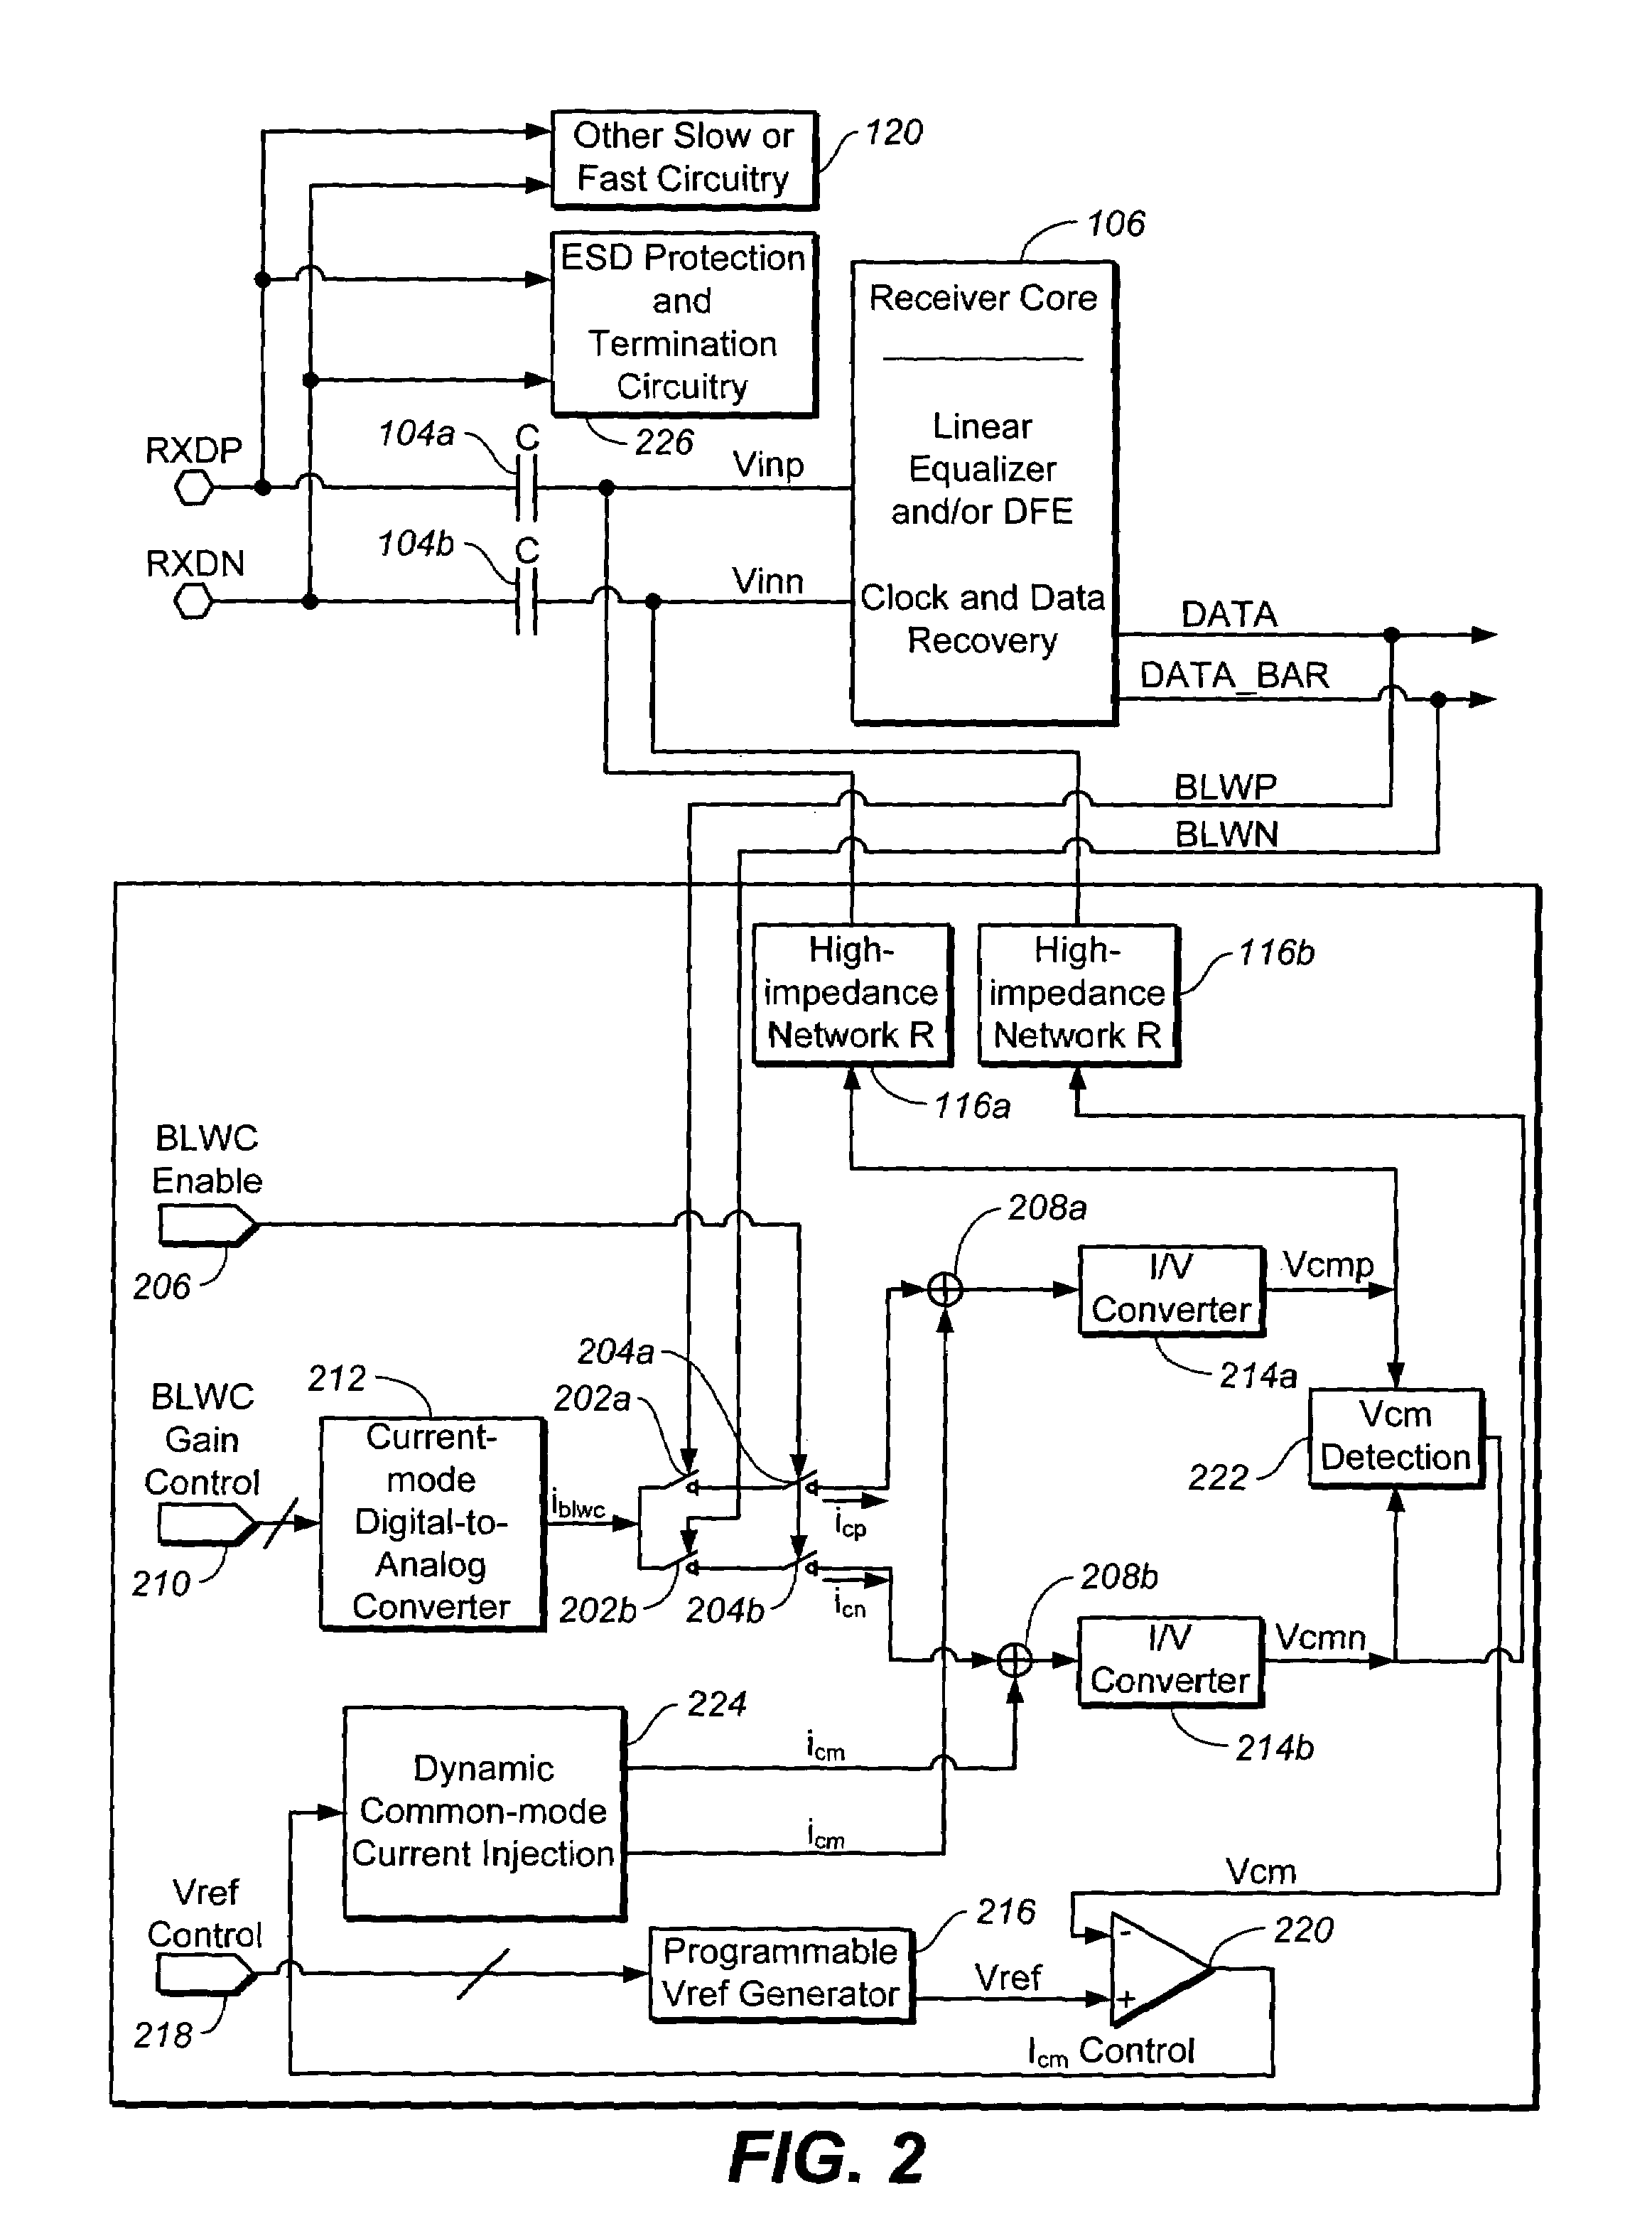 AC coupling circuit integrated with receiver with hybrid stable common-mode voltage generation and baseline wander compensation